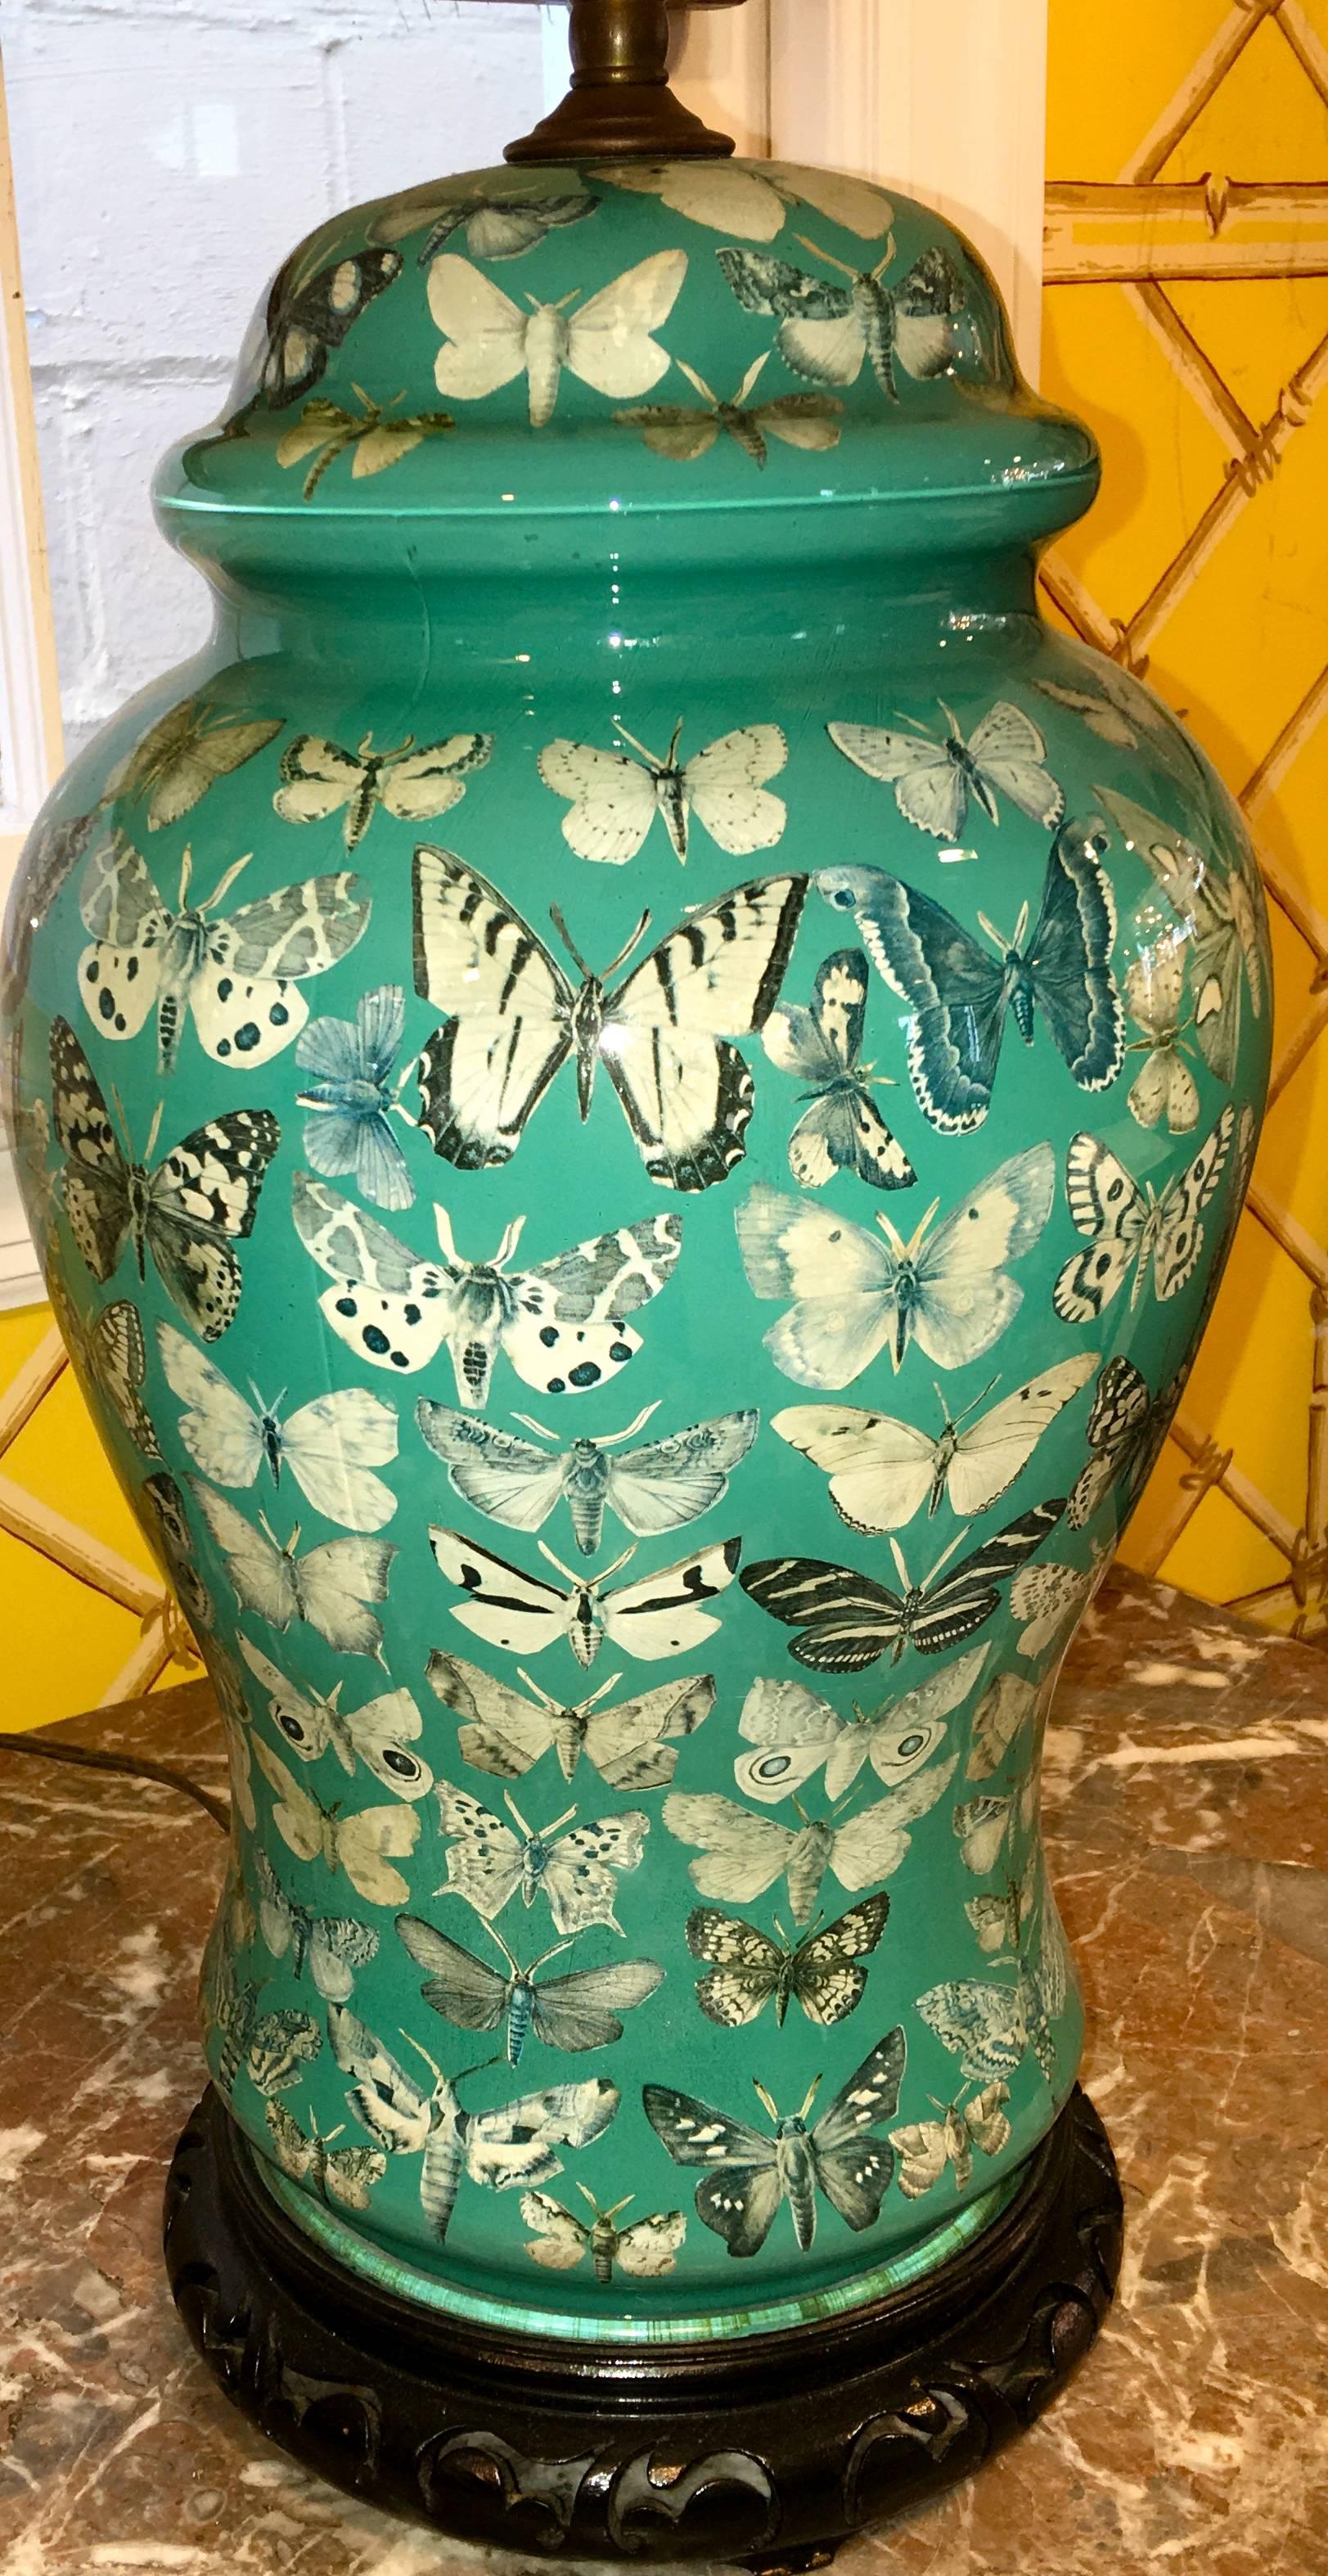 North American Pair of American Decoupage Butterfly Design Glass Temple Jar Lamps circa 1950